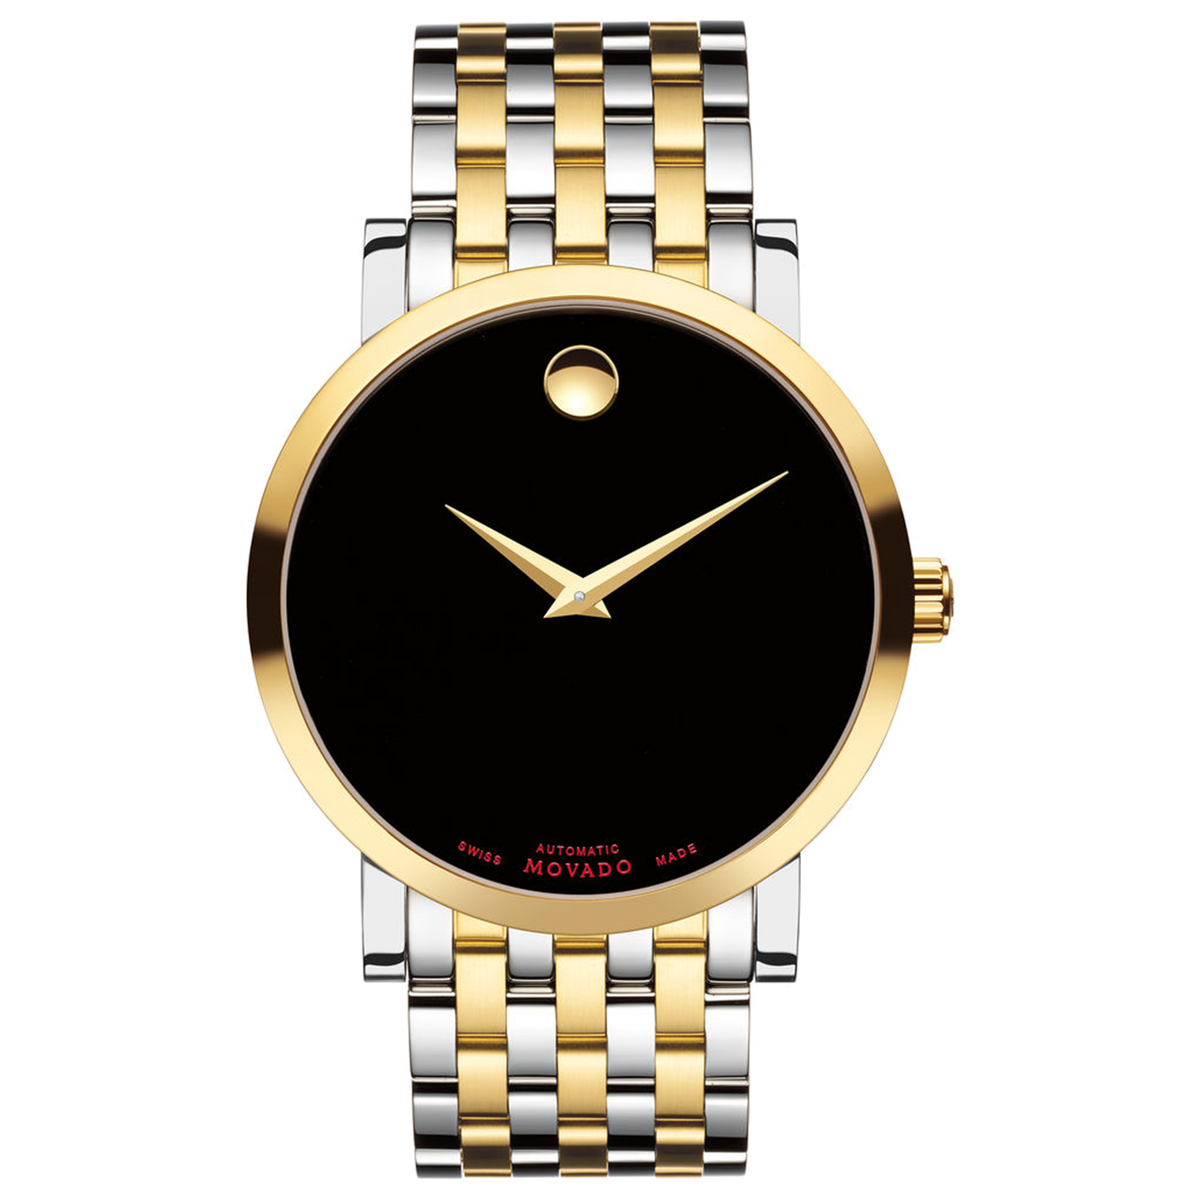 Movado Red Label - 2/T Automatic